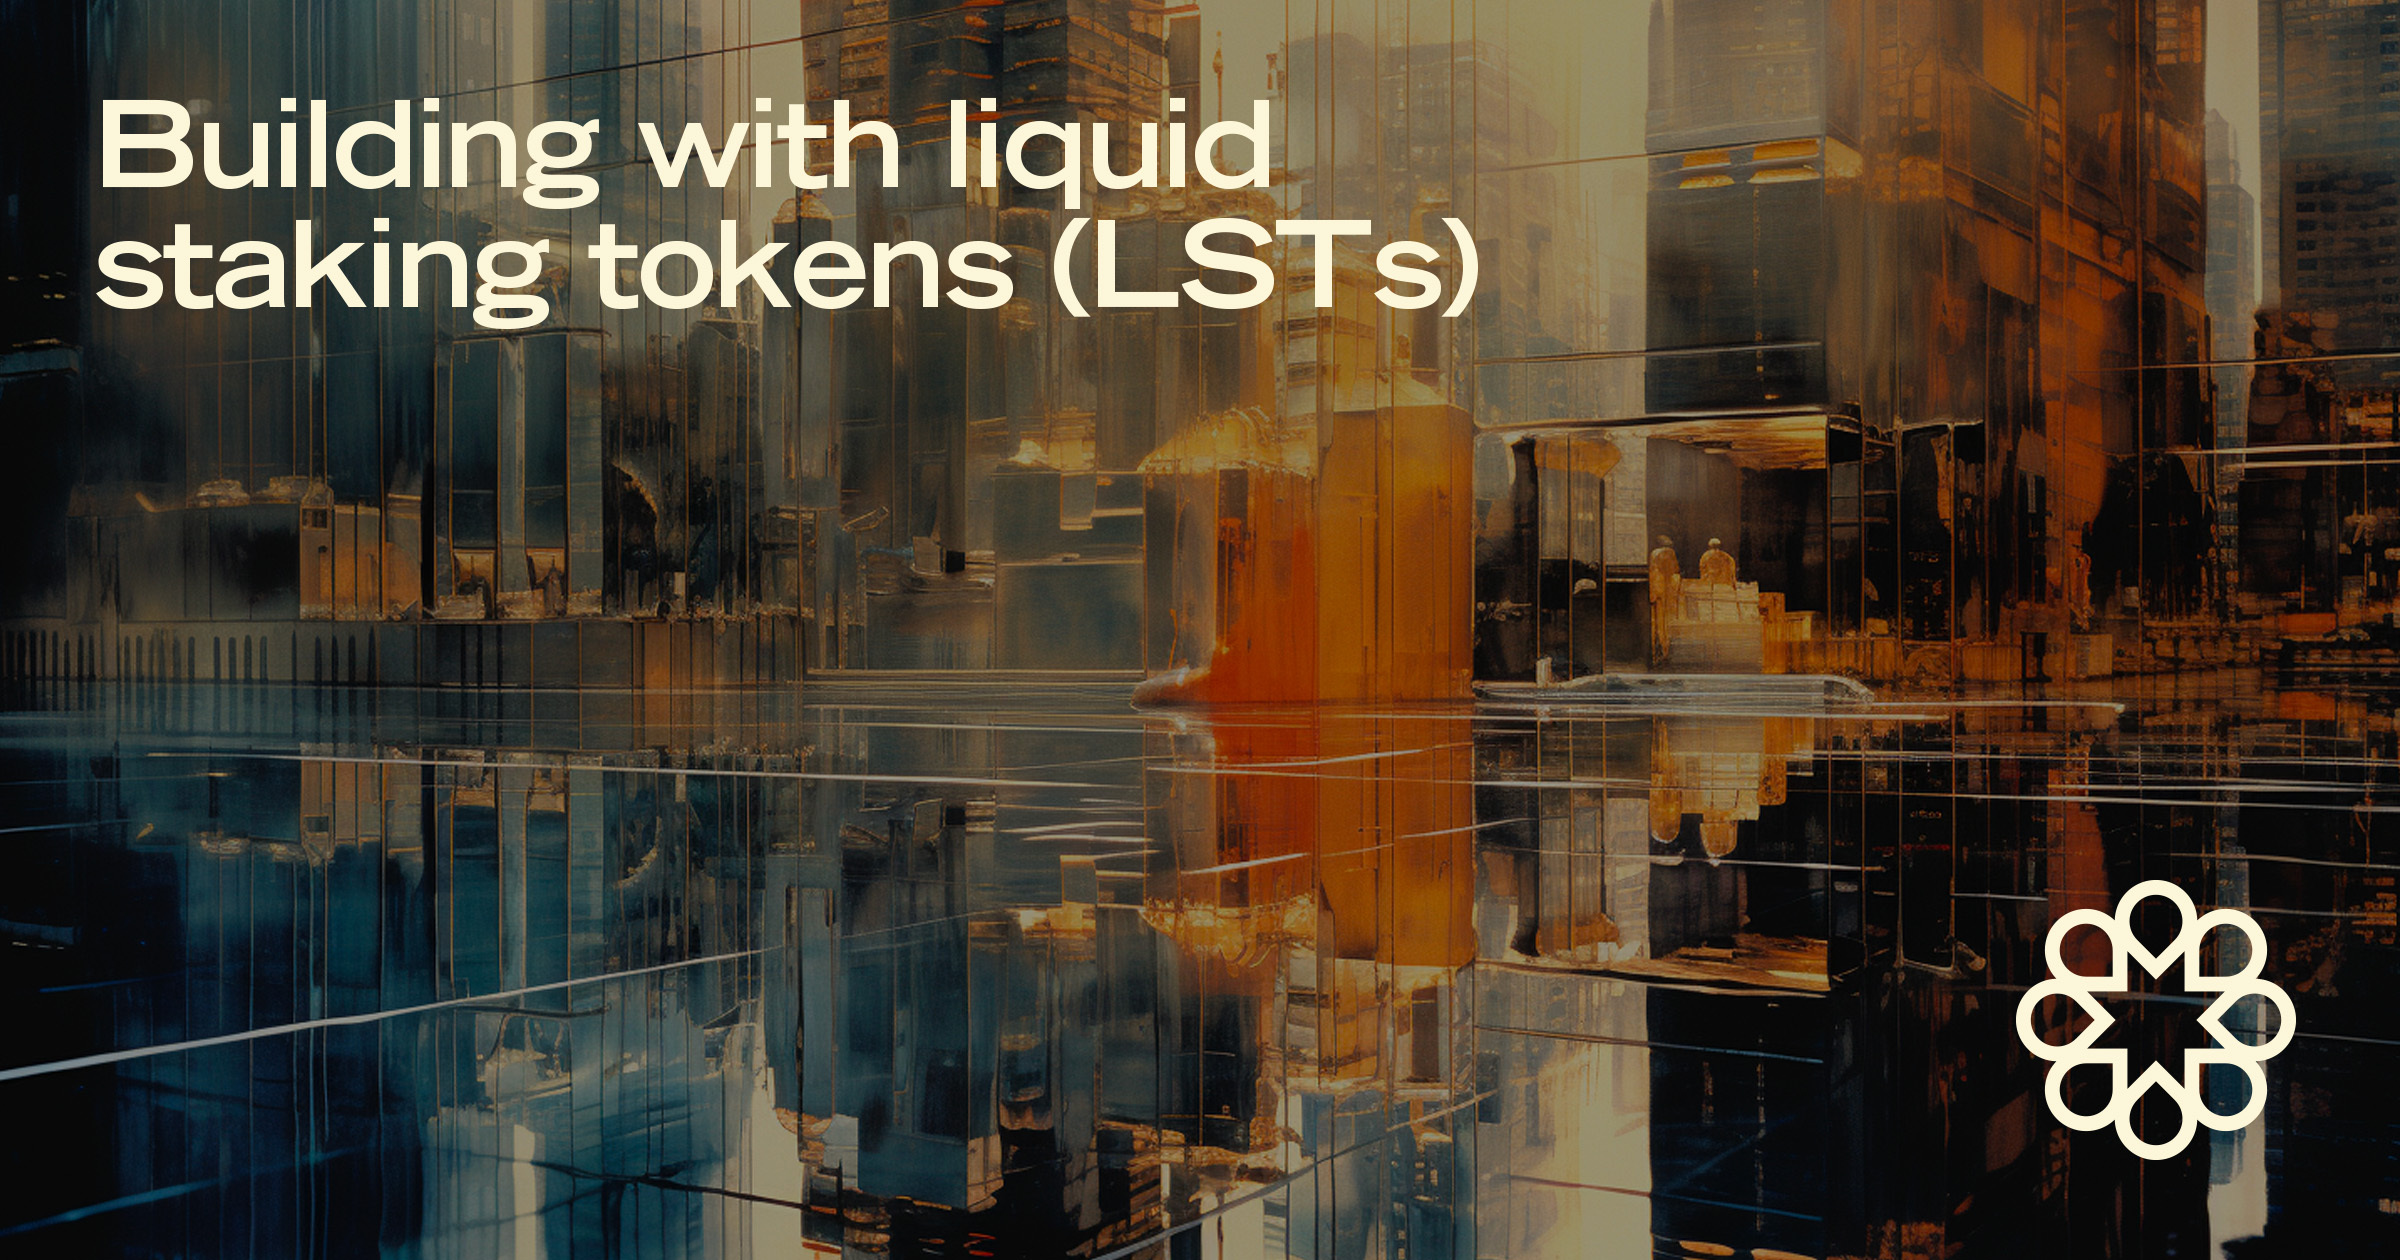 Building with liquid staking tokens (LSTs) The DeFi innovations unlocked by composable, reward-bearing LSTs.